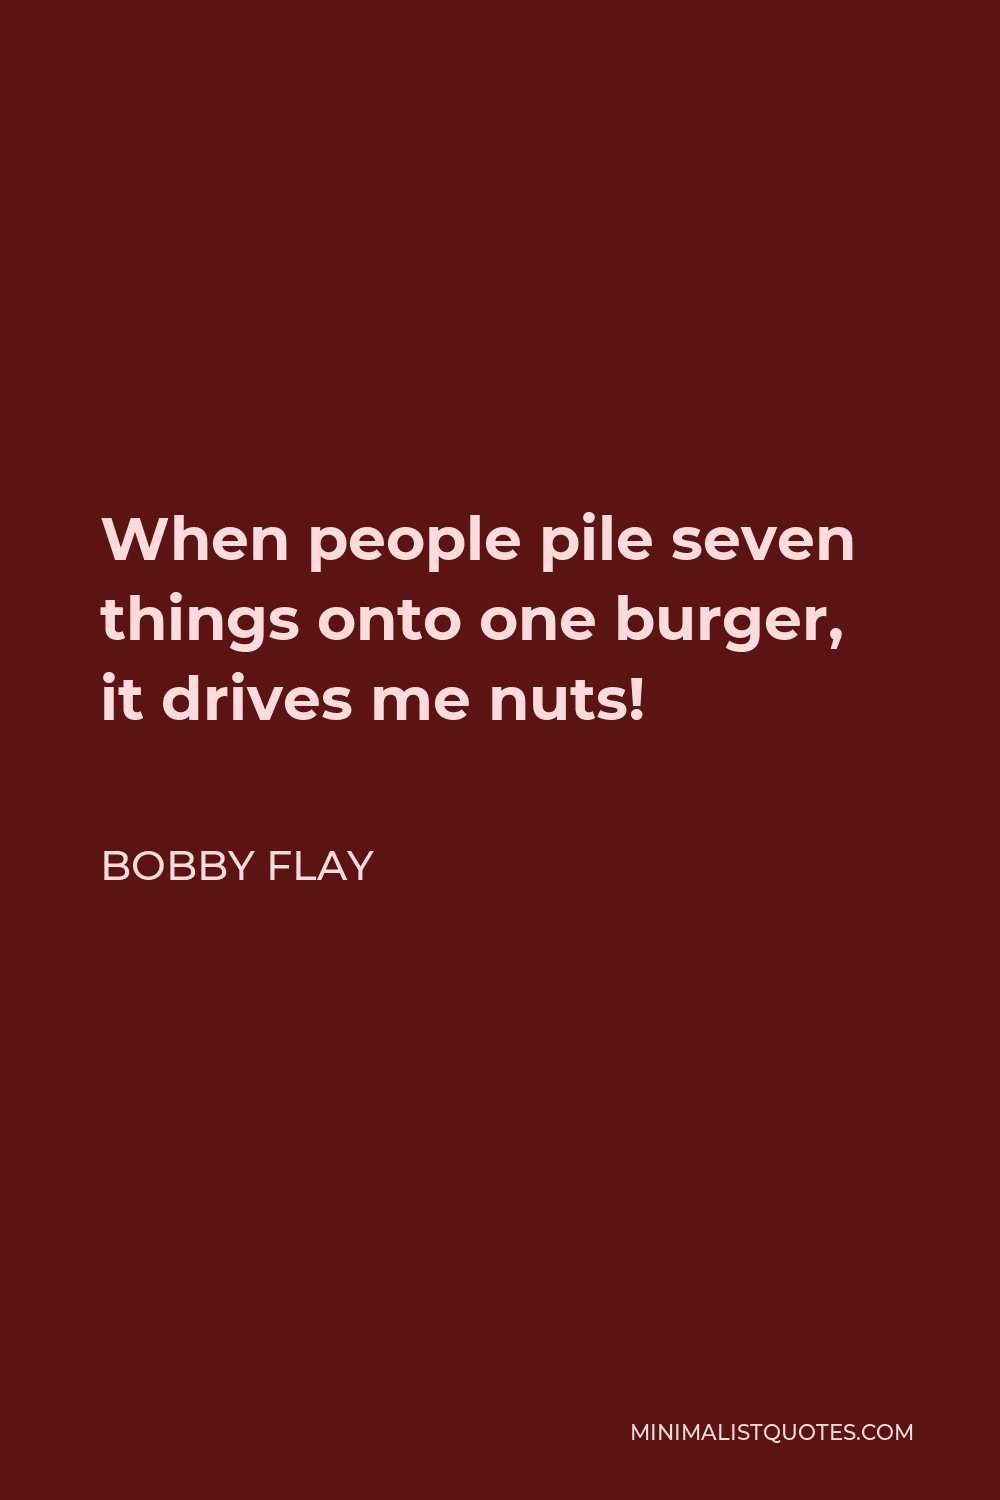 Bobby Flay Quote - When people pile seven things onto one burger, it drives me nuts!